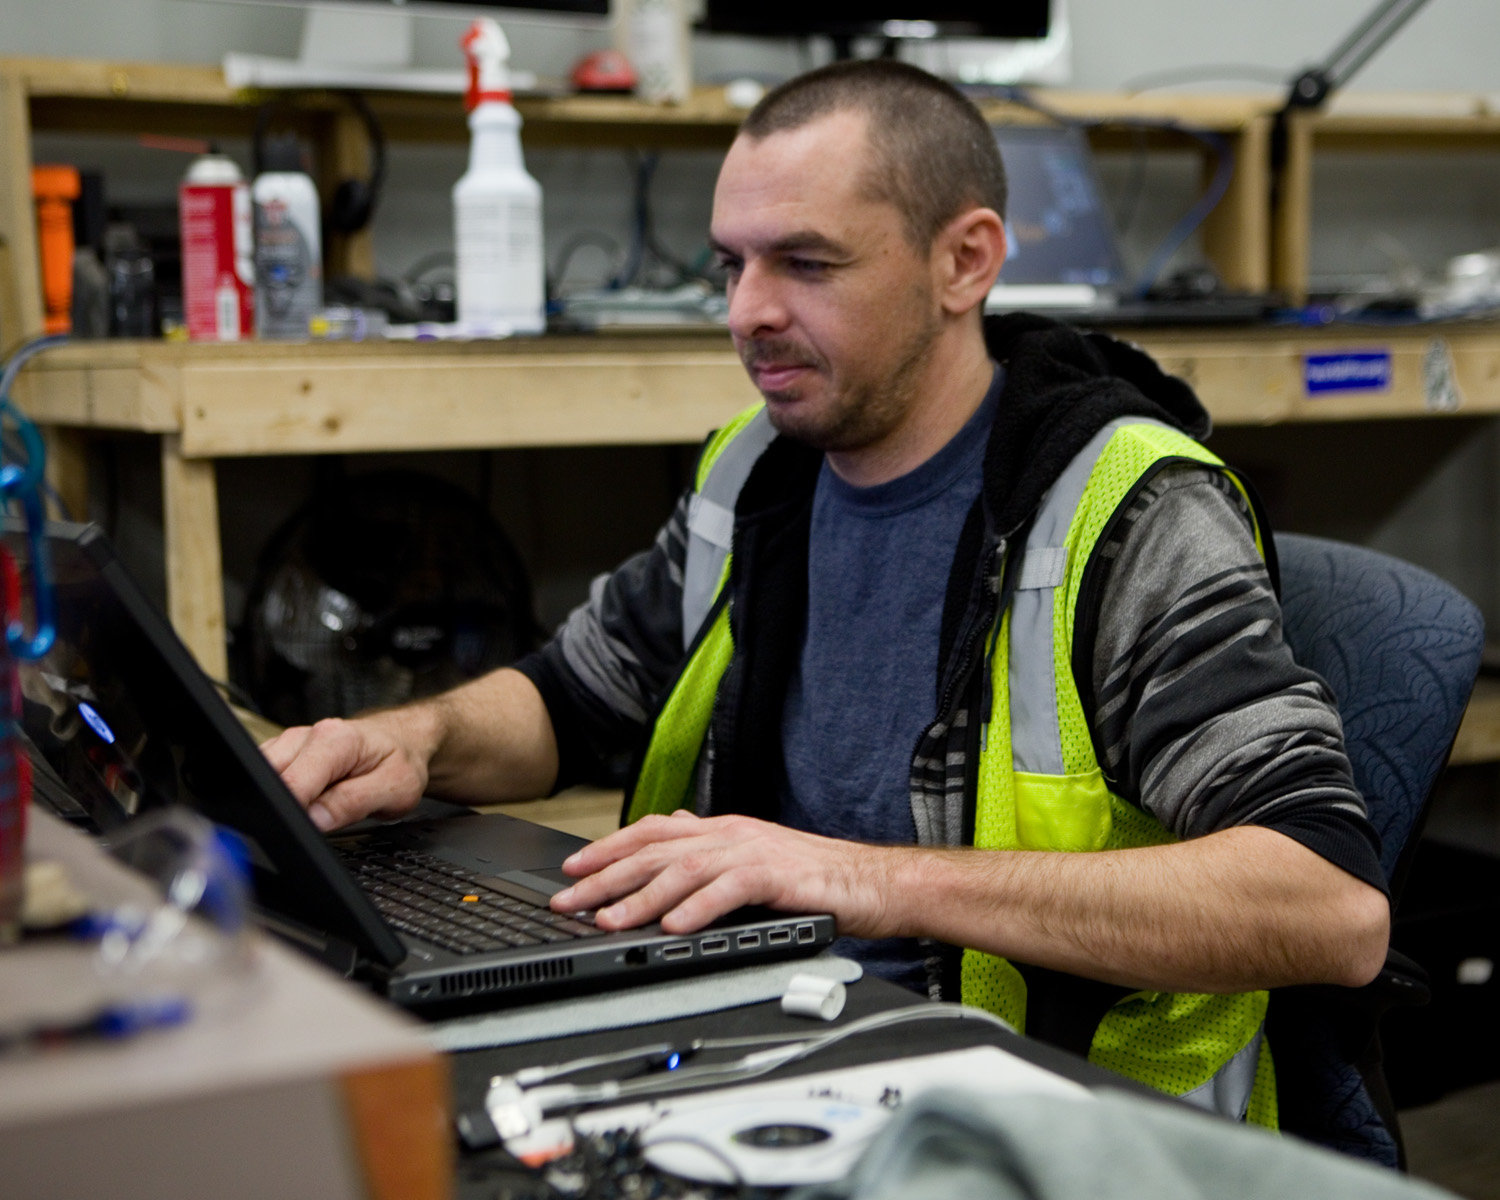 Laptop Technician Scott Holmstrom tests a laptop to determine what repairs are needed before it can be ready for sale.